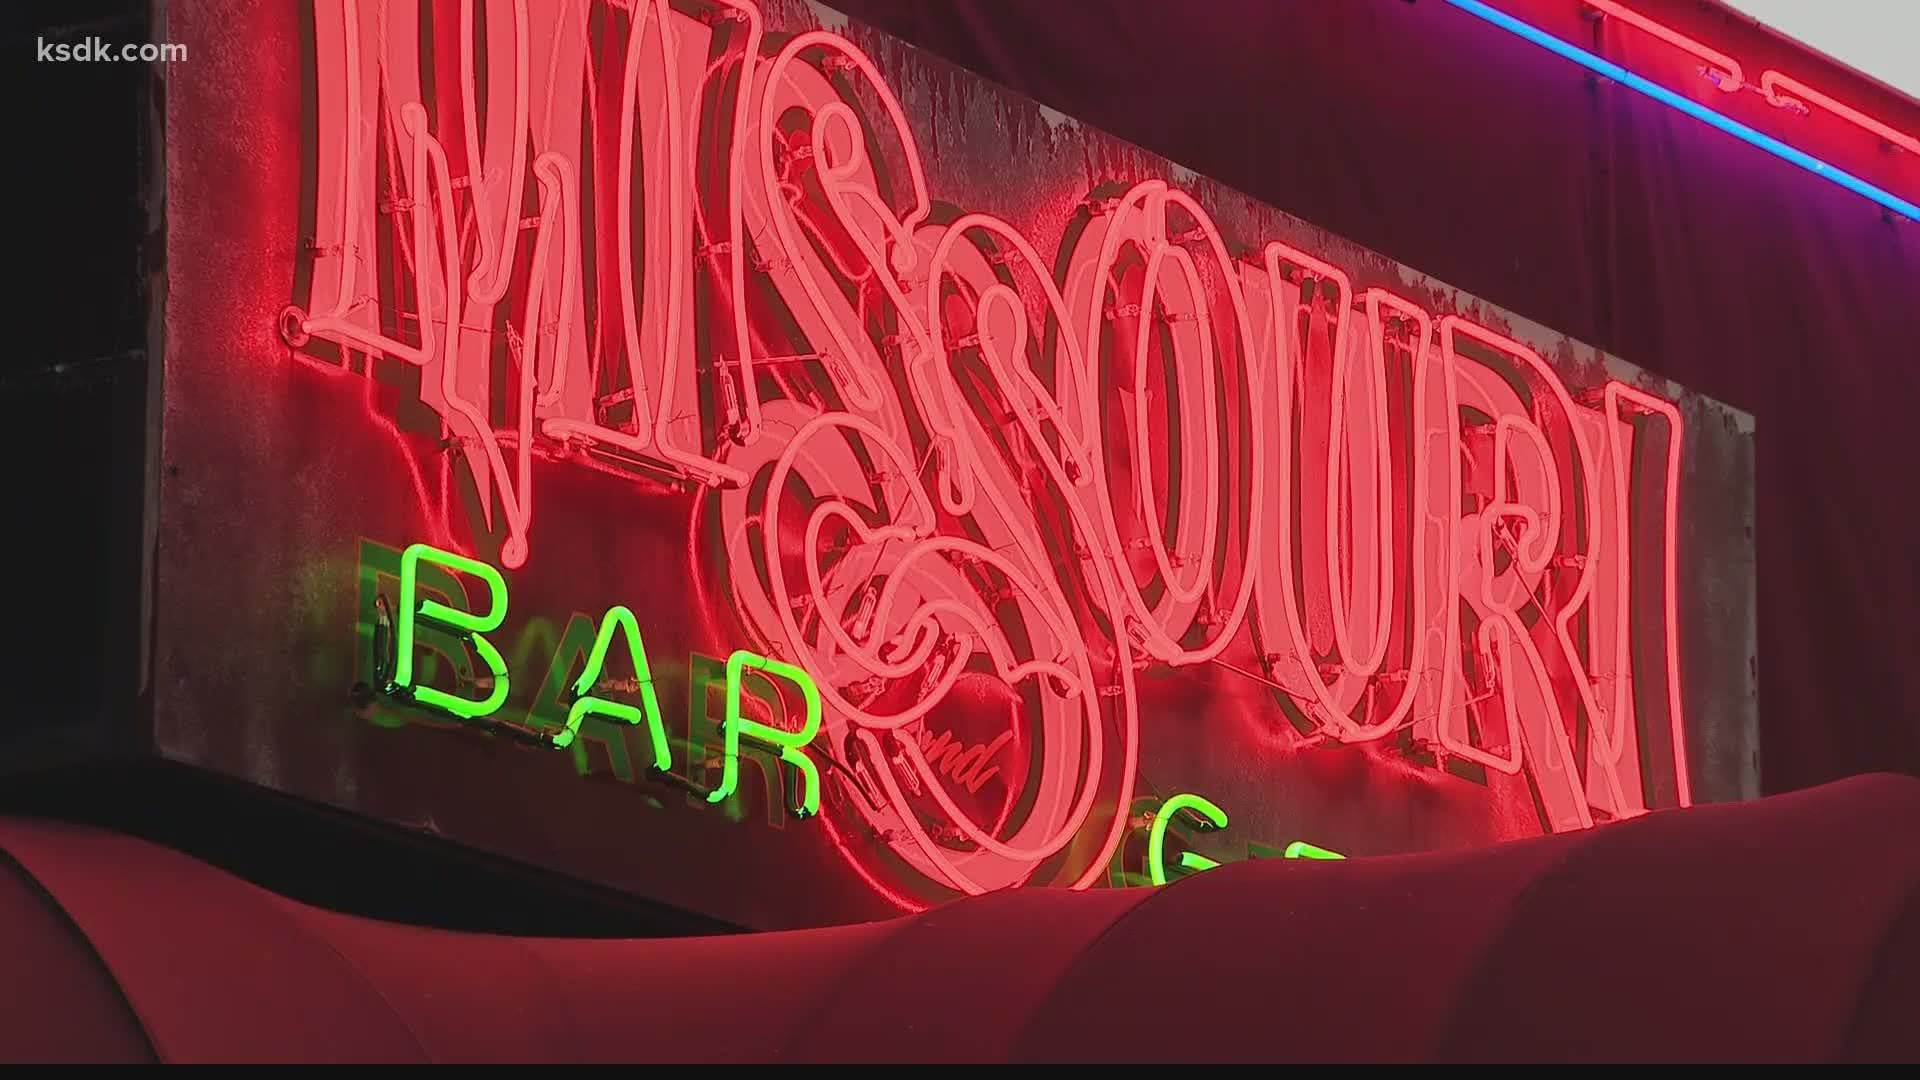 After Saturday, pictures are all people will have left of the popular Missouri Bar and Grille some call legendary. The owners announced they would be closing